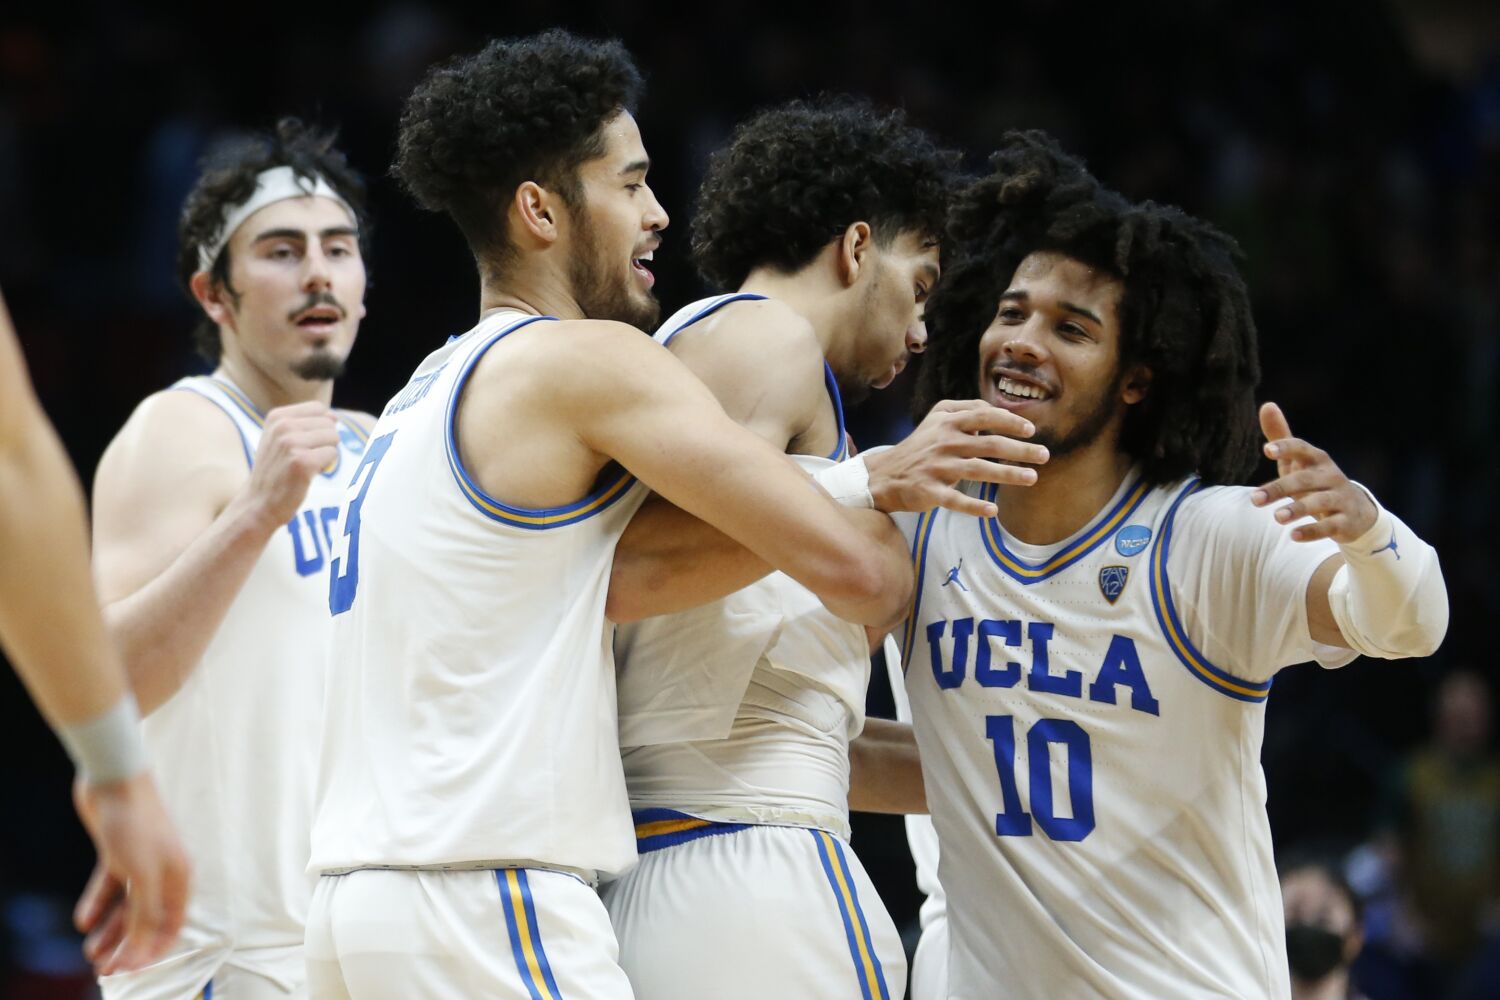 Will UCLA win the Pac-12 basketball title after being a preseason darling?